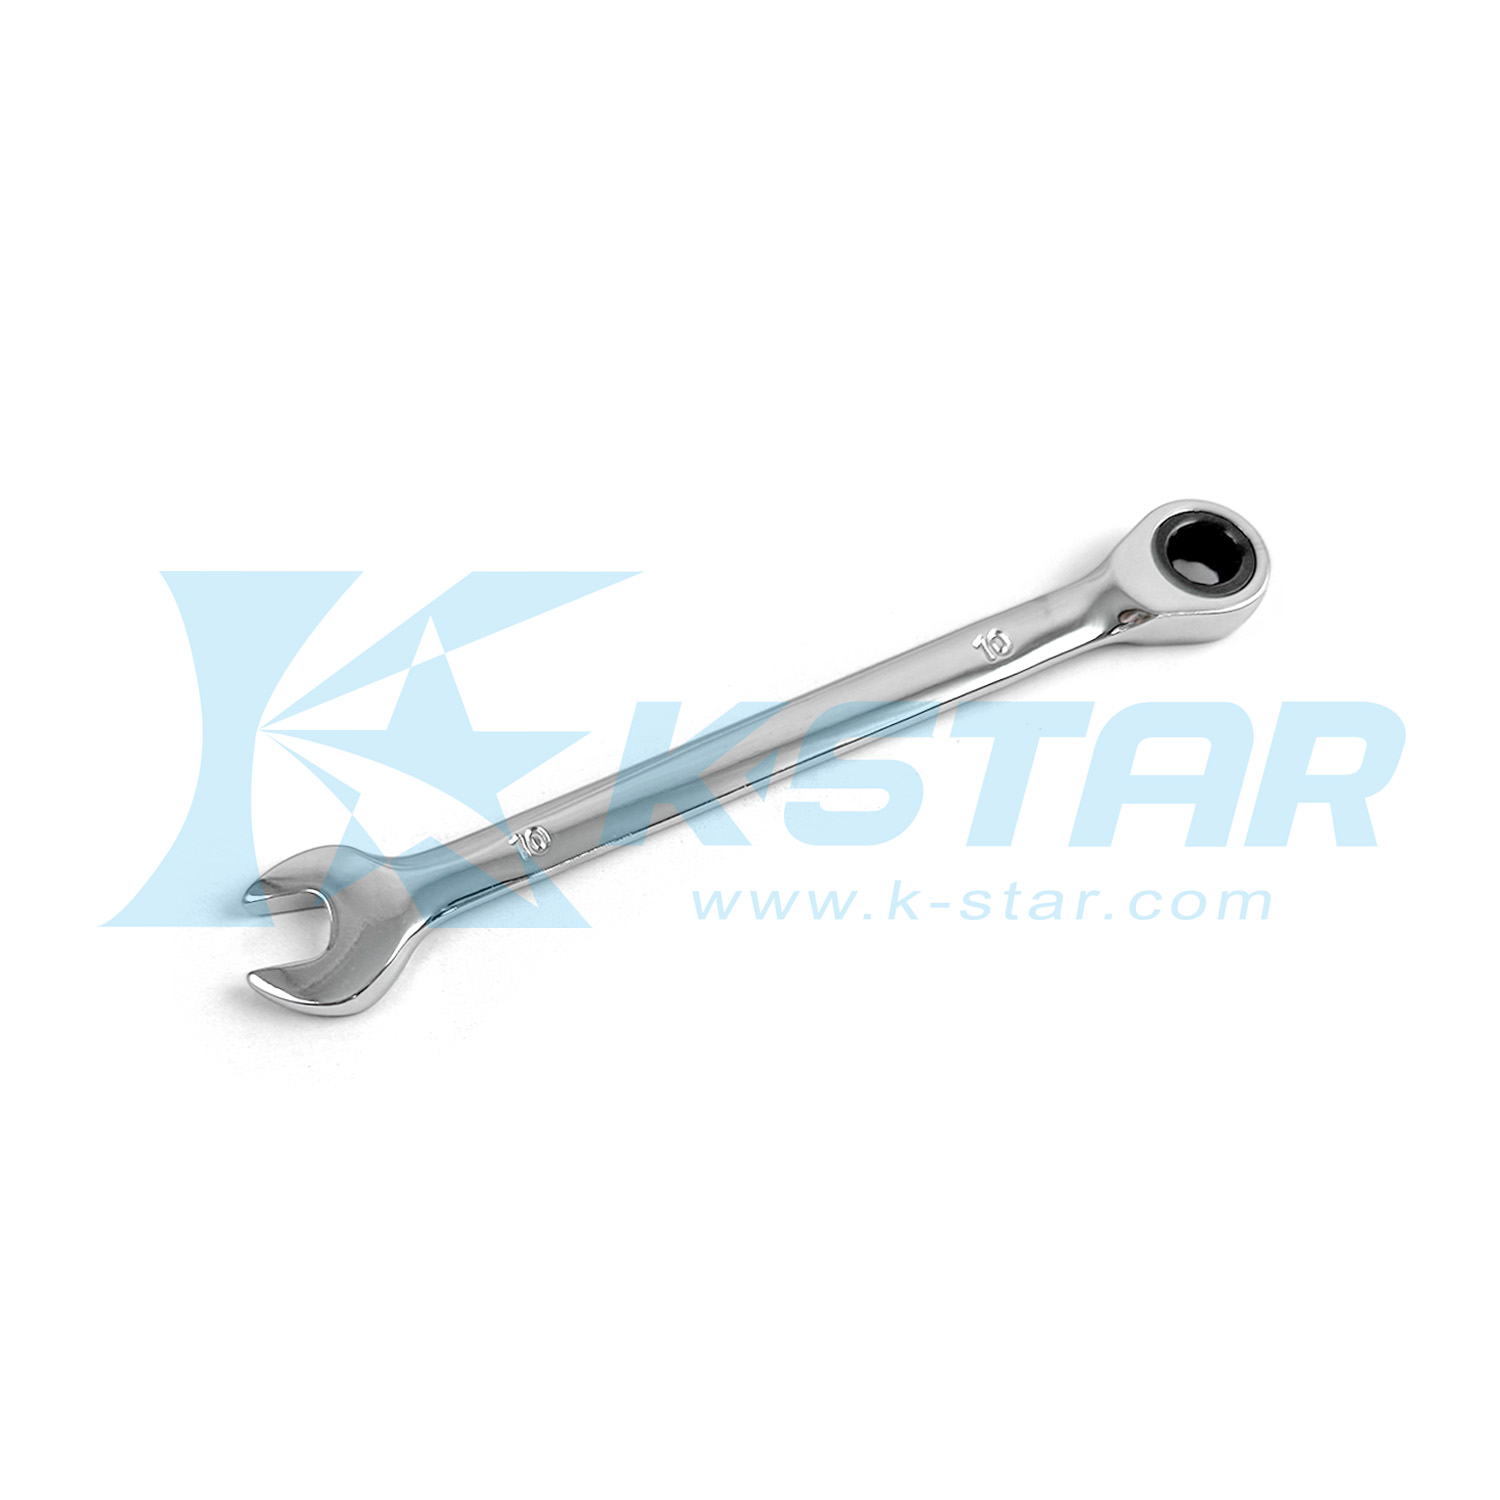 ONE-WAY 72 TEETH RATCHET WRENCH 10 MM